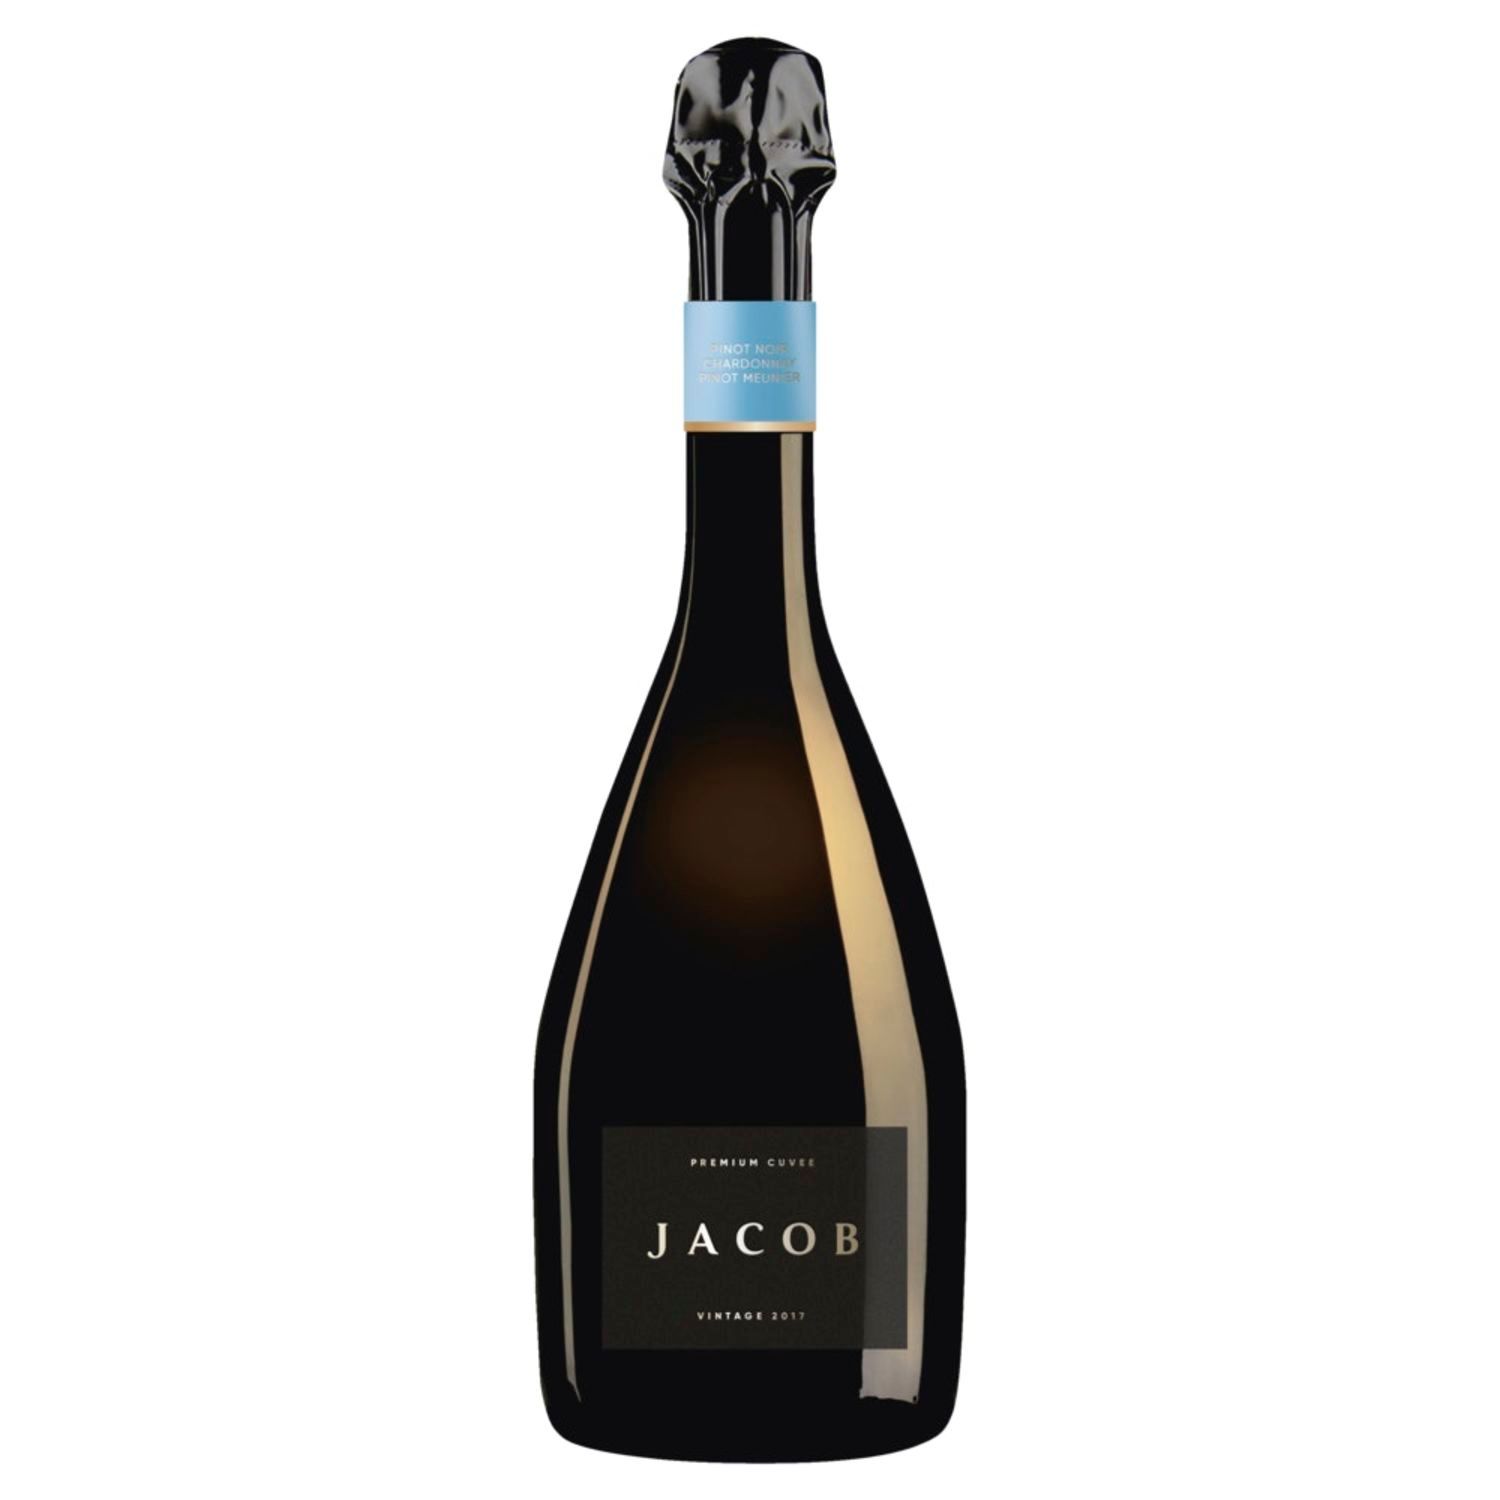 Elegant and complex with intense strawberry, oyster shell and toasty characters, with a layered creamy palate with persistence and crisp acid line<br /> <br />Alcohol Volume: 11.50%<br /><br />Pack Format: Bottle<br /><br />Standard Drinks: 6.8</br /><br />Pack Type: Bottle<br /><br />Country of Origin: Australia<br /><br />Region: Multi-Regional Blend<br /><br />Vintage: Vintages Vary<br />